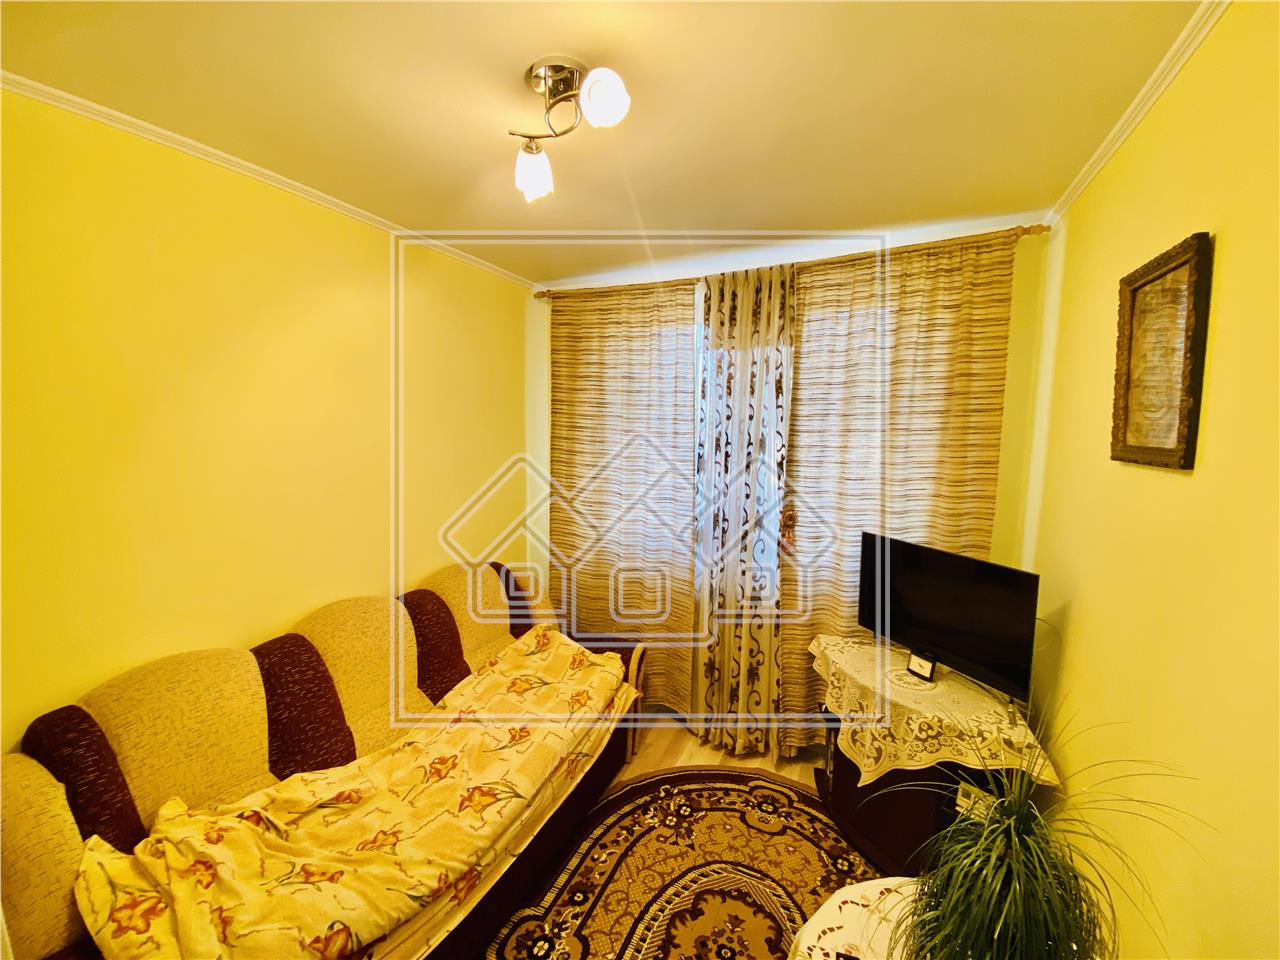 Apartment for sale in Sibiu - 3 rooms and balcony - Hipodrom I Area